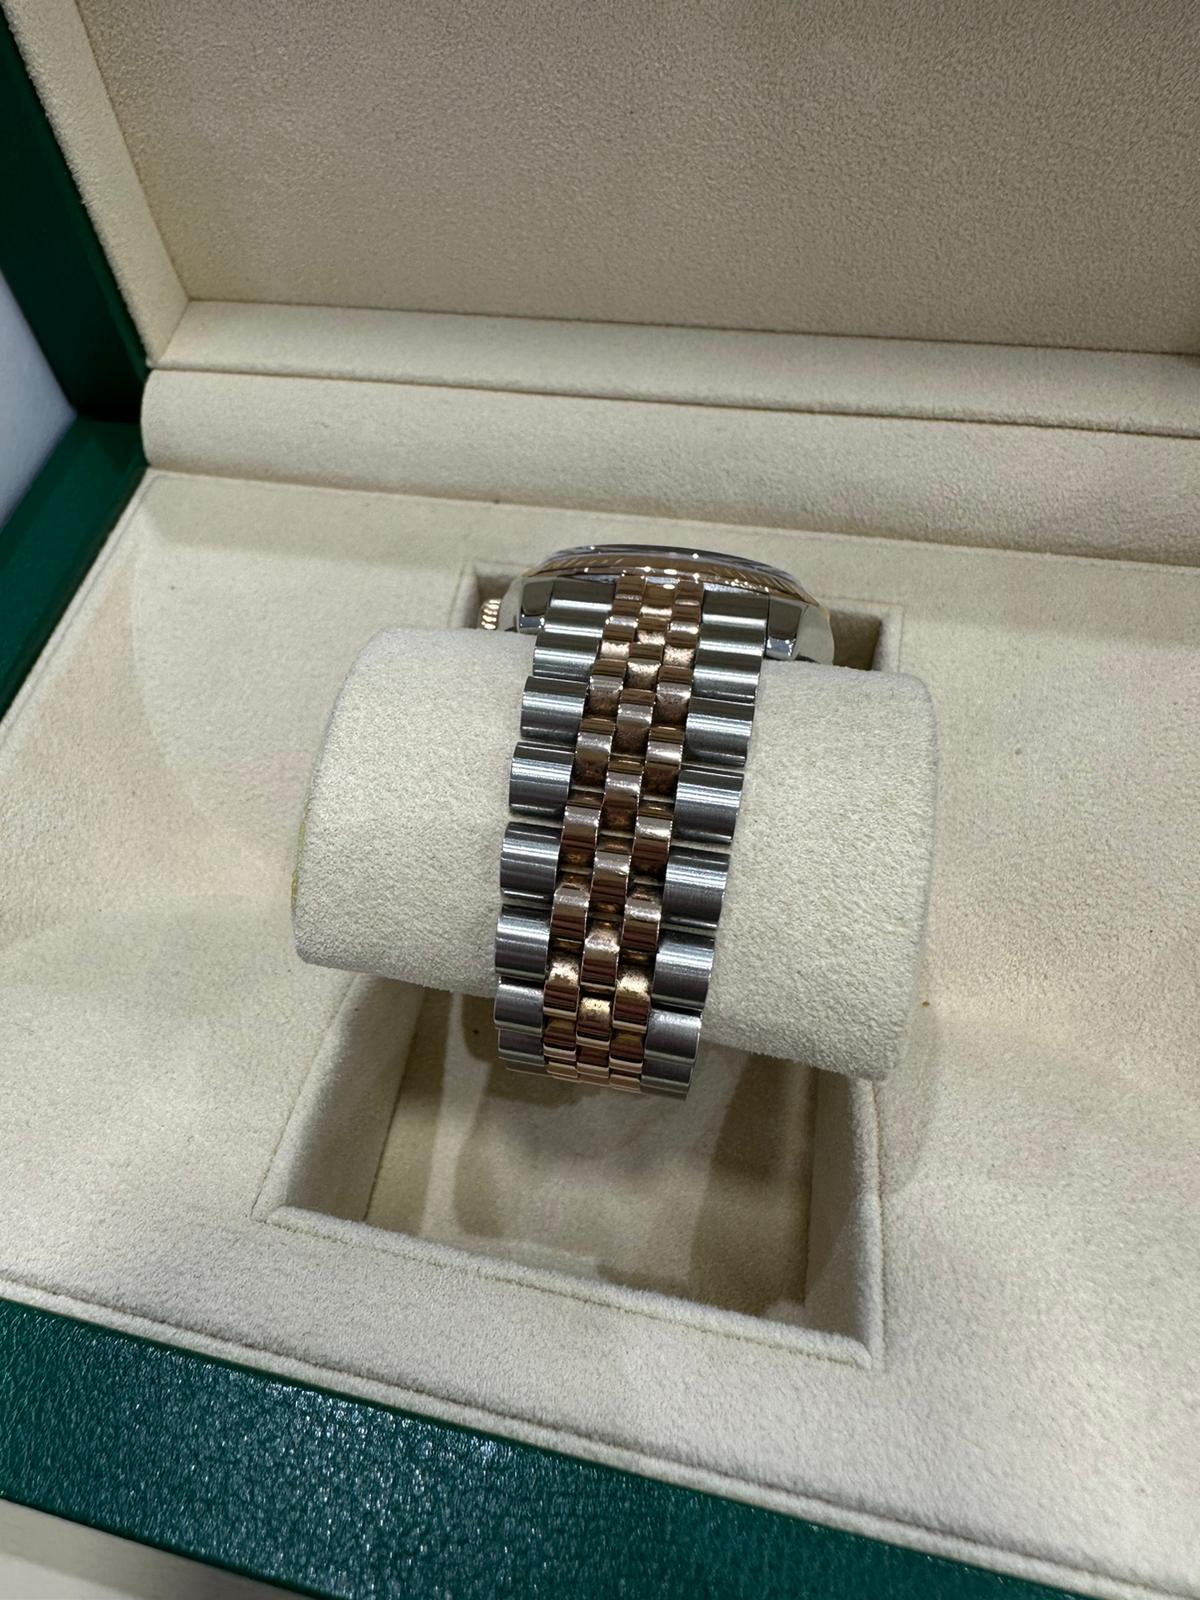 Rolex Datejust 36mm steel and rose gold concealed - Image 5 of 11